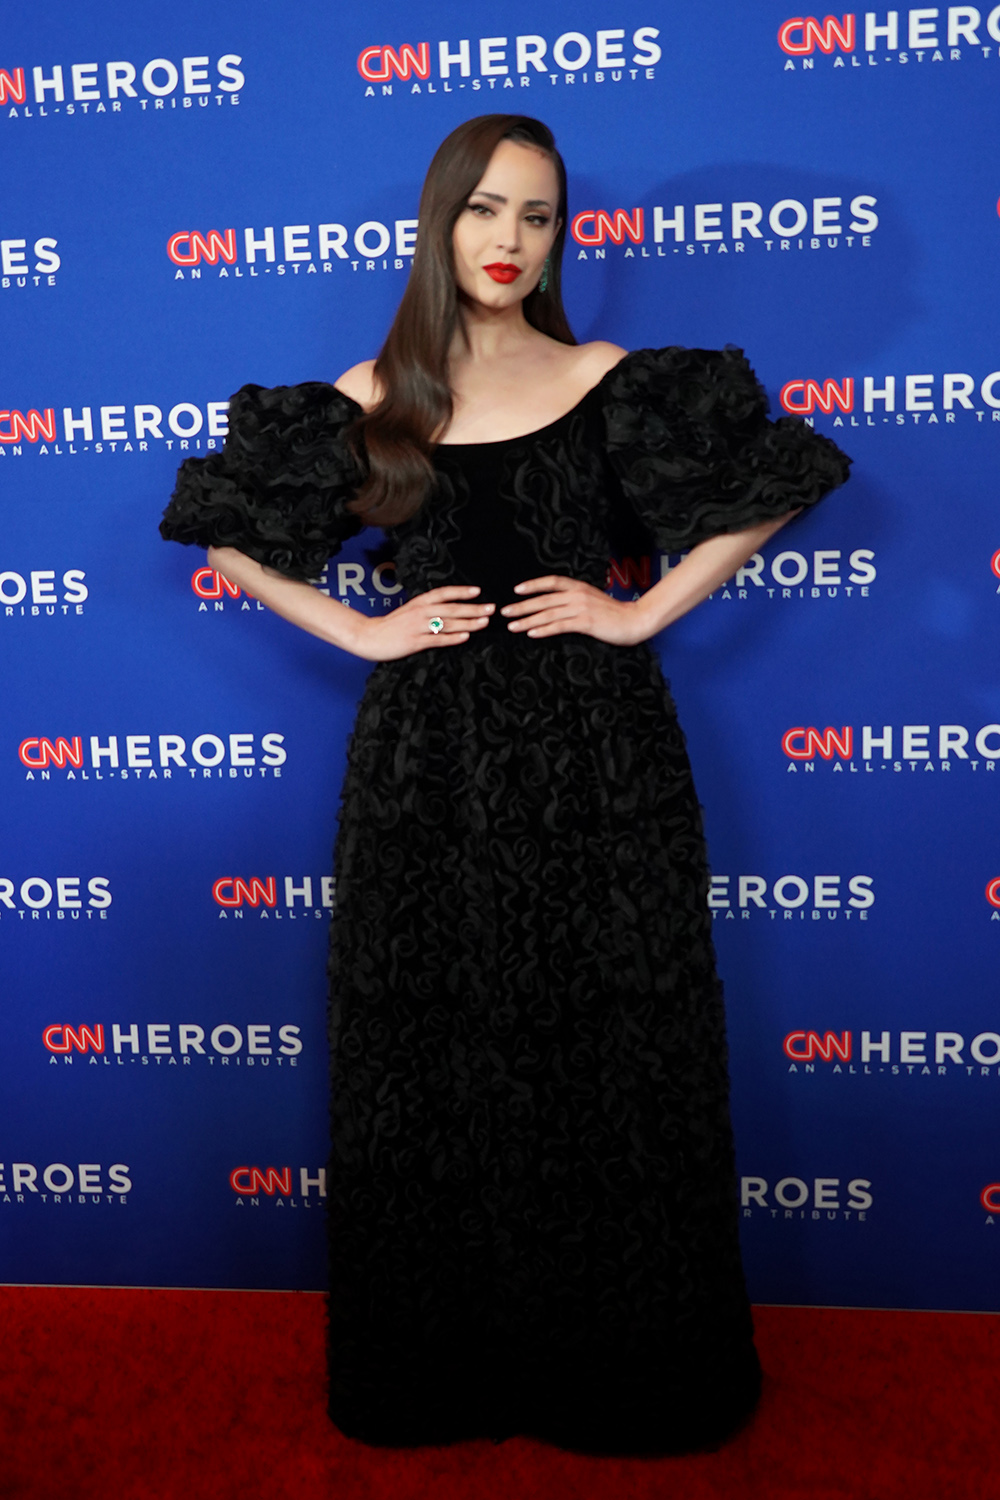 Sofia Carson oozed elegance at the 16th Annual CNN Heroes All Star Tribute. Her black gown had a lush texture and puffy sleeves